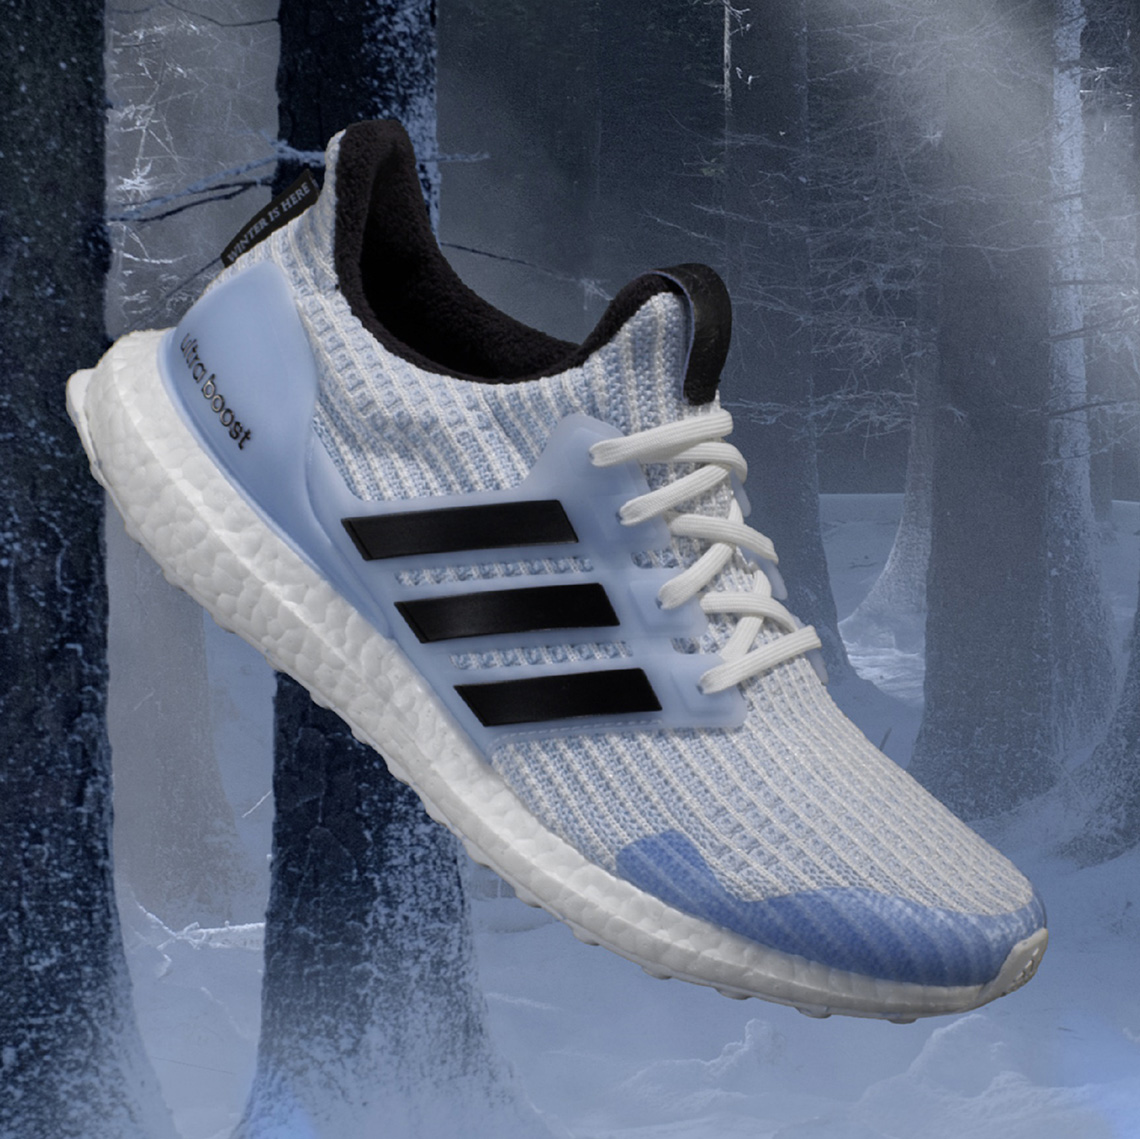 Adidas Ultraboost X Game of Thrones White Walkers